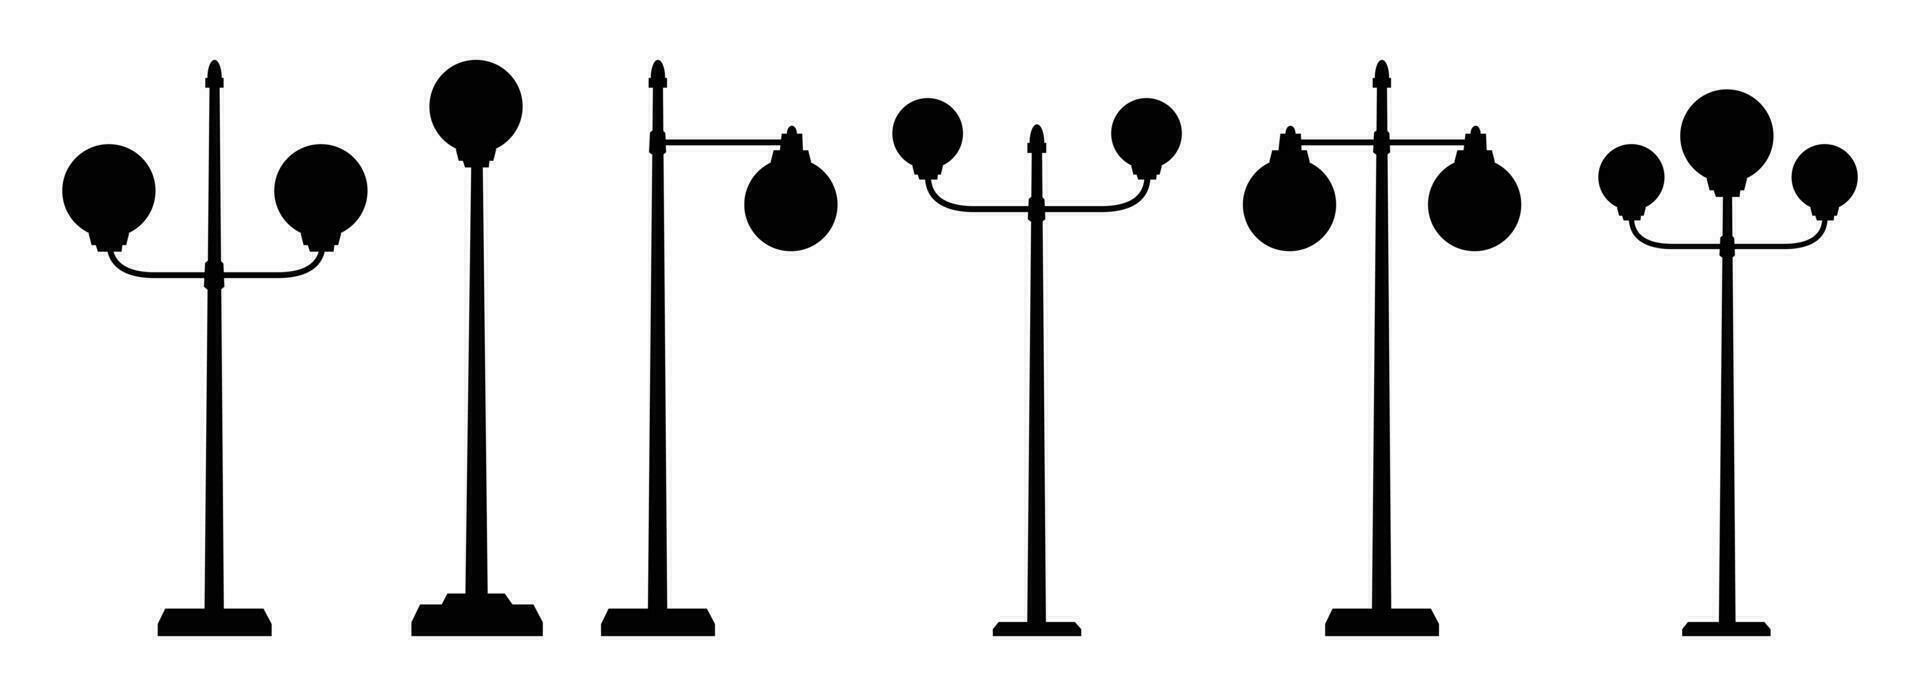 Cartoon city street light silhouette collection vector illustration isolated on white